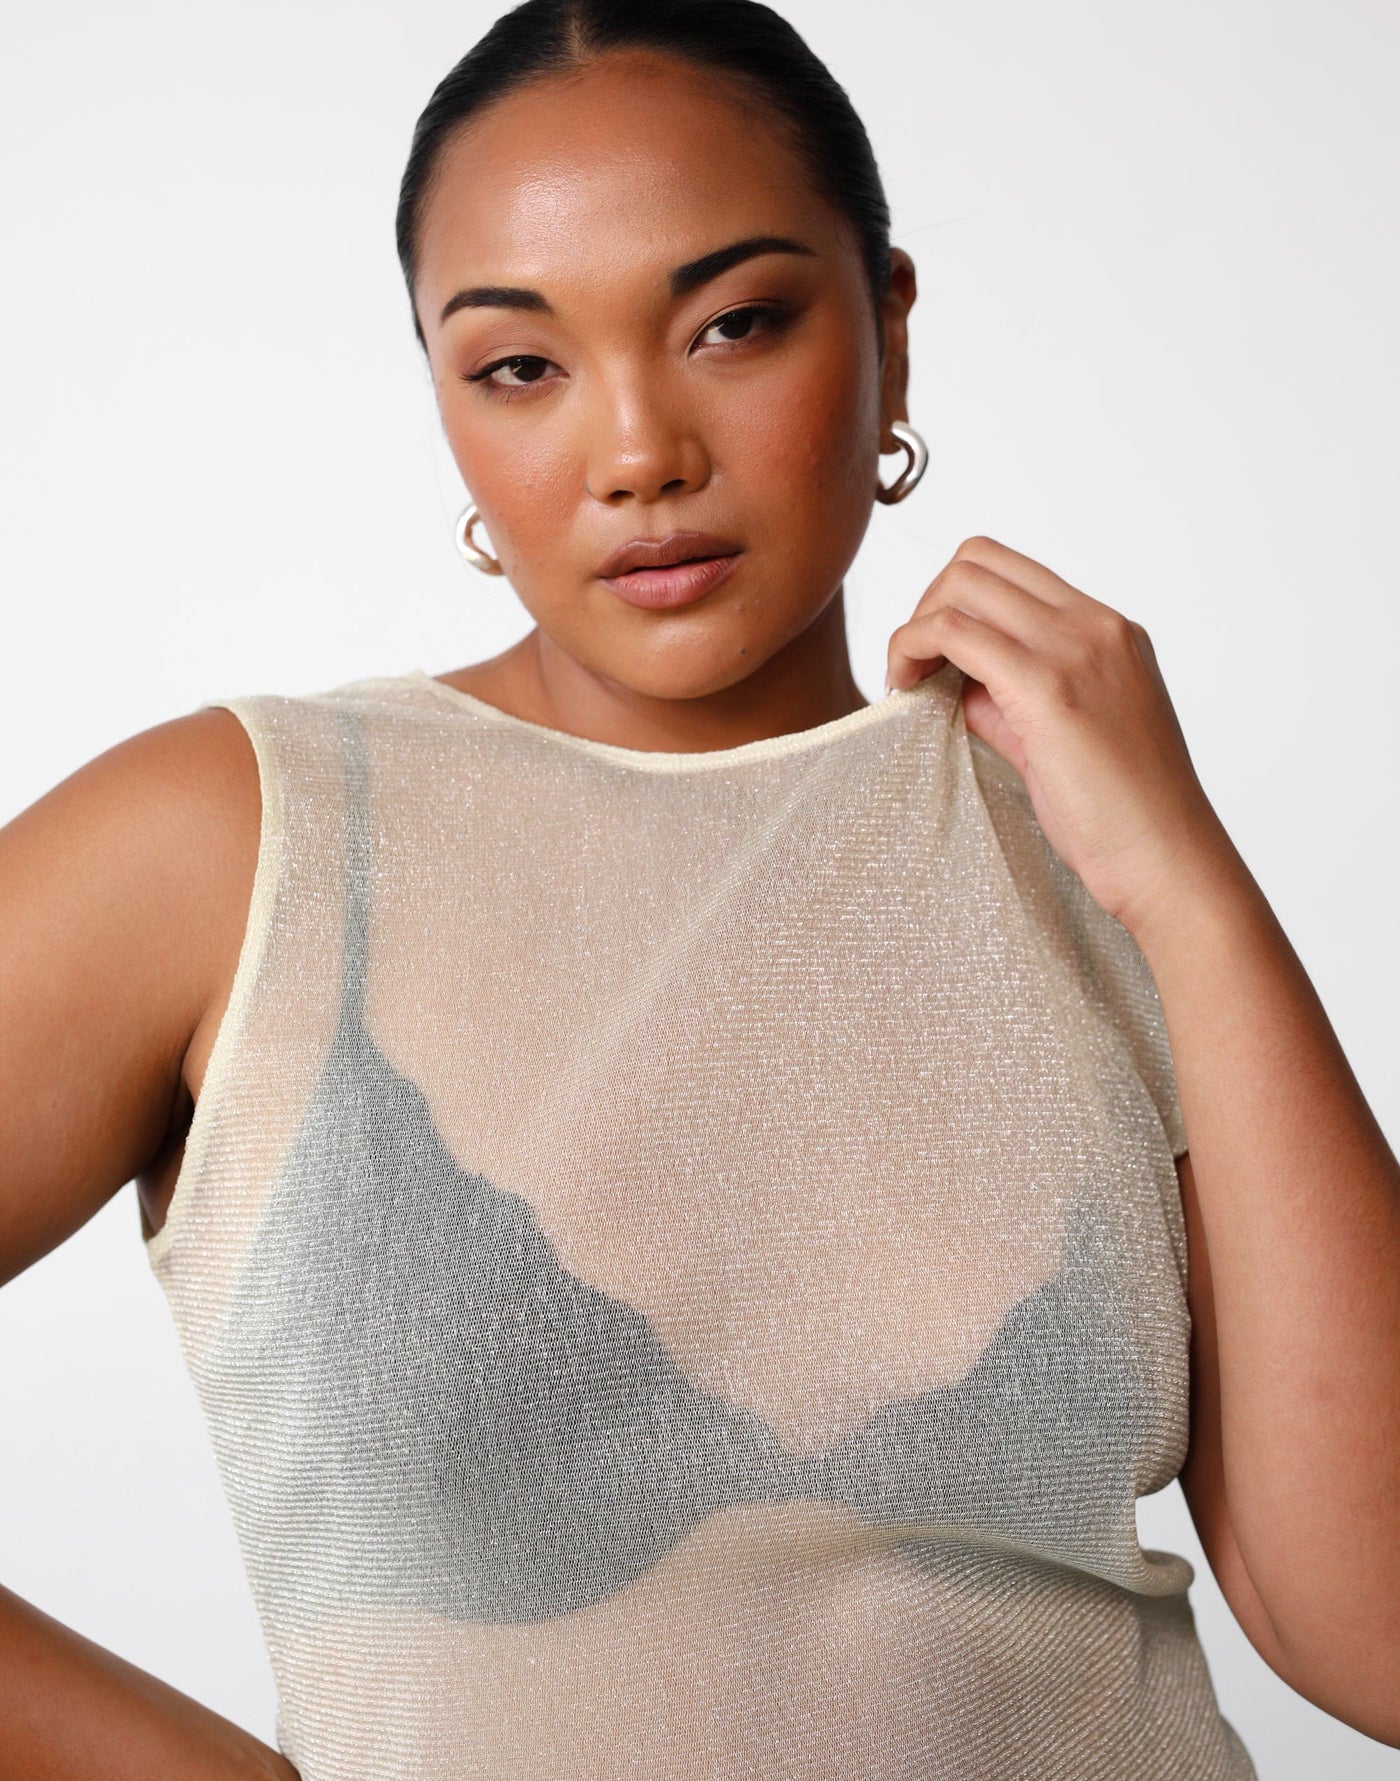 Mischa Mesh Tank (Margarita) | Charcoal Clothing Exclusive - Shimmer Detail Round Neckline Sheer Top - Women's Top - Charcoal Clothing